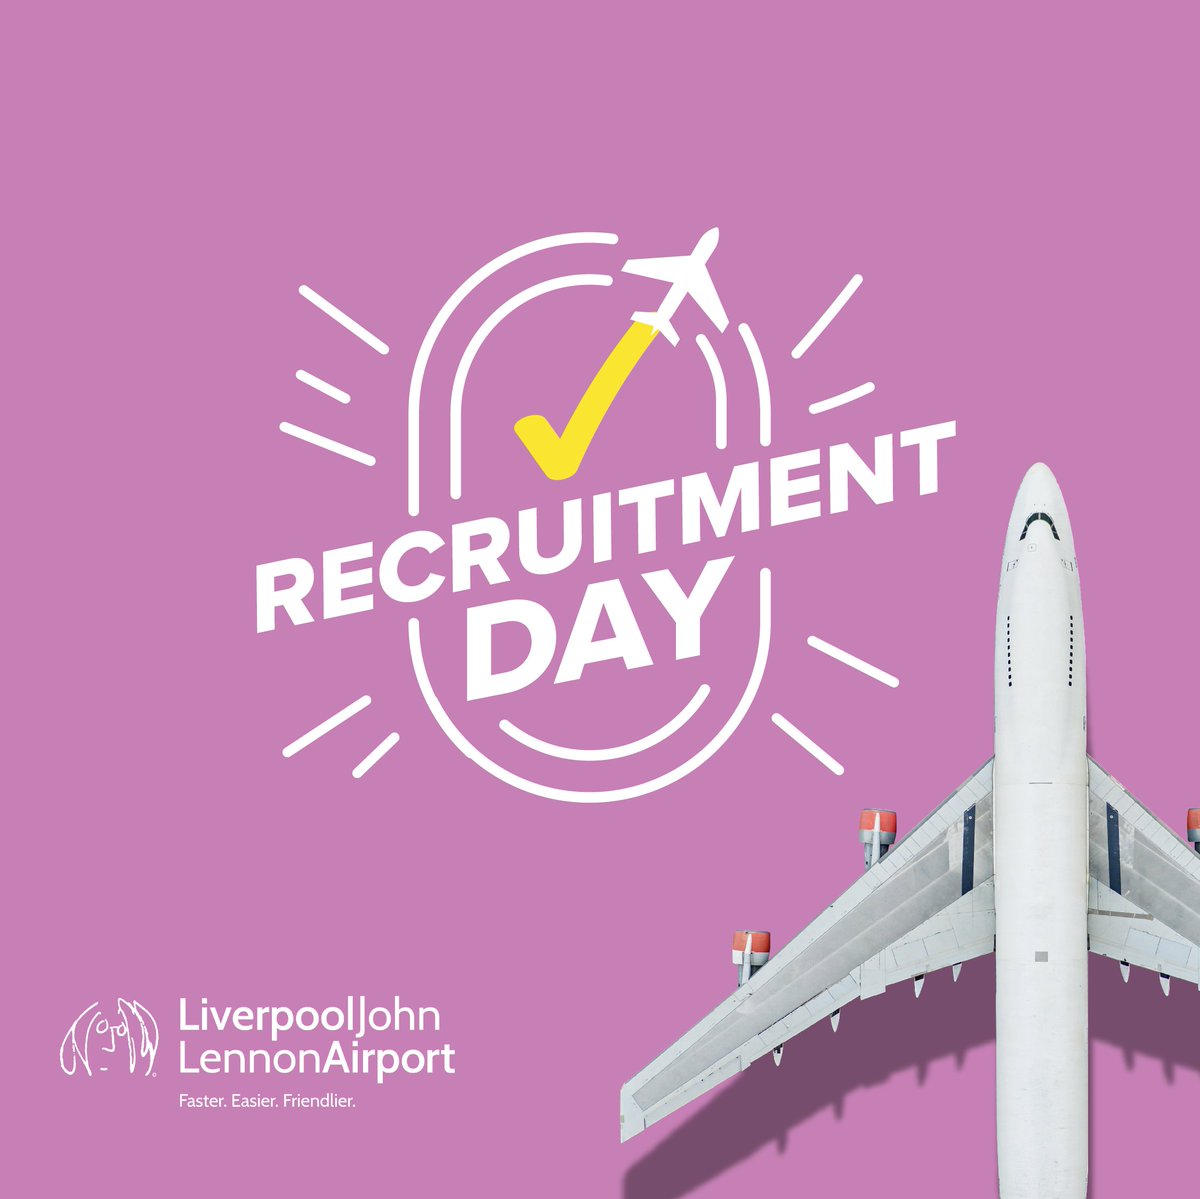 On Thursday 11 January we are hosting a Recruitment Day from 10am-4pm, with more than 190 vacancies on offer from partners and suppliers including Jet2.com, Wilson James, SSP, World Duty Free and Boots. For more info, click here 👉 liverpoolairport.com/recruitment-day